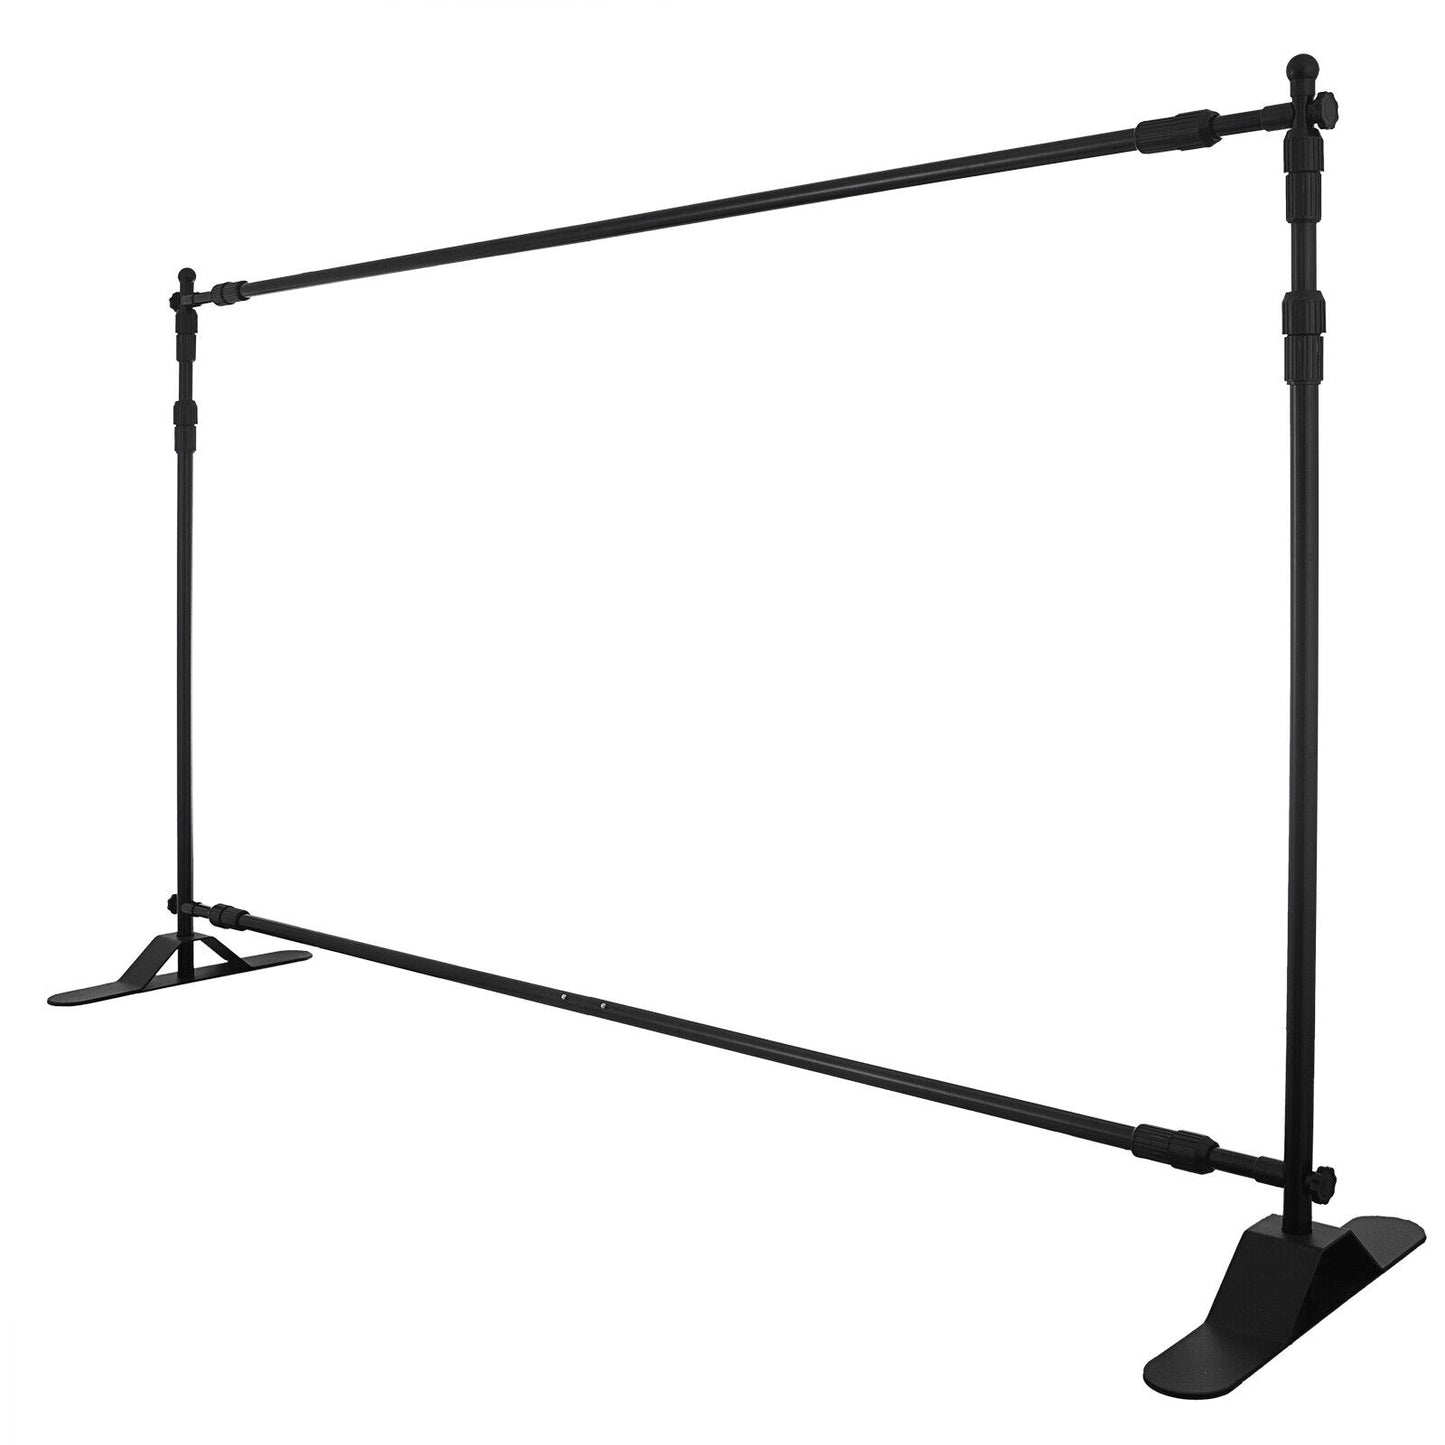 8'x10' Step and Repeat Banner Stand Adjustable Telescopic Trade Show Backdrop US